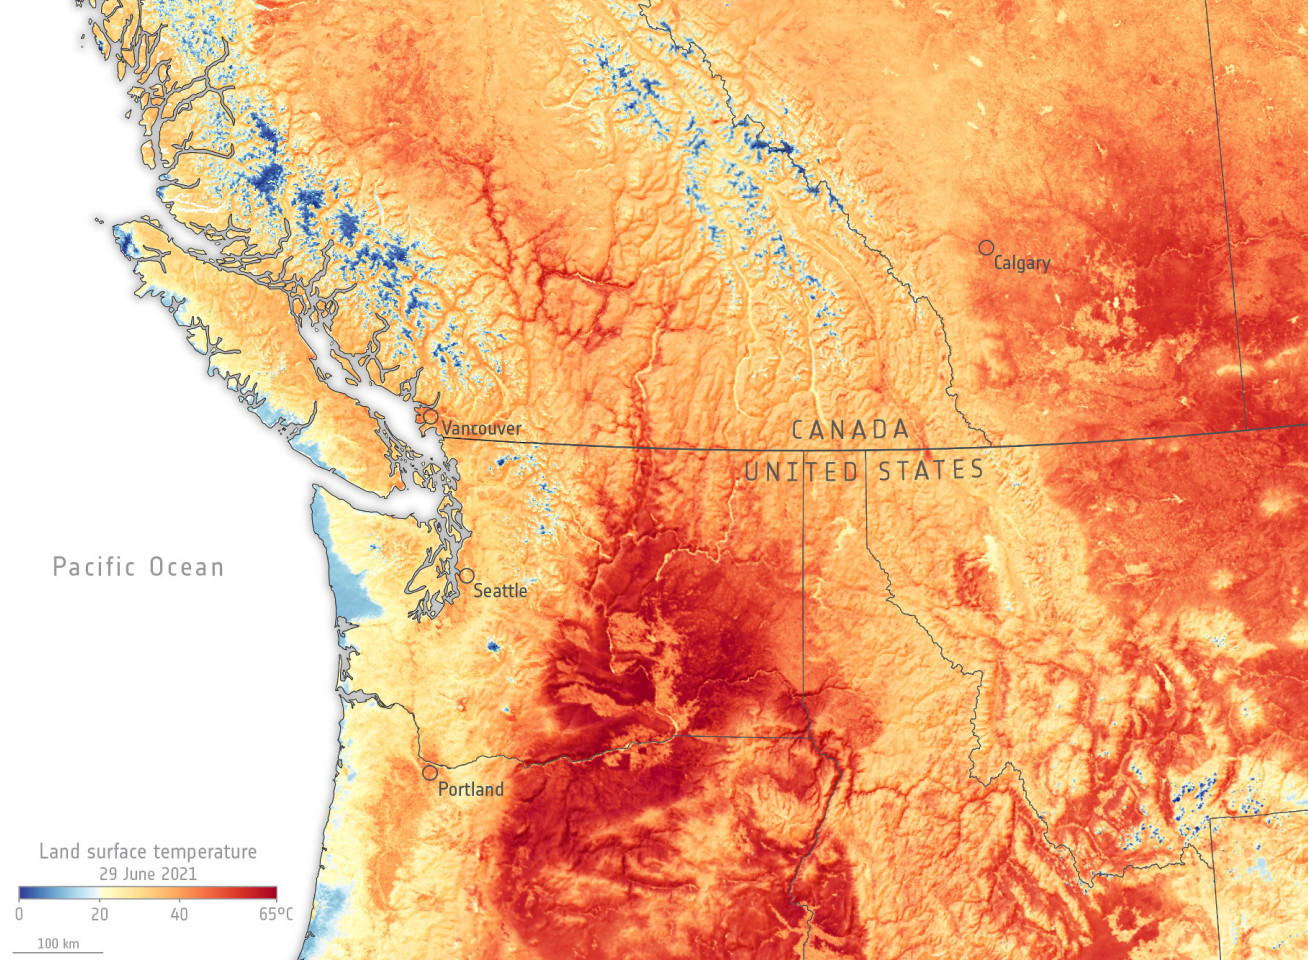 Satellite image map shows US-Canada border including Vancouver and Calgary, Seattle and Portland, and heat map shows land surface temperatures up to 65 degrees